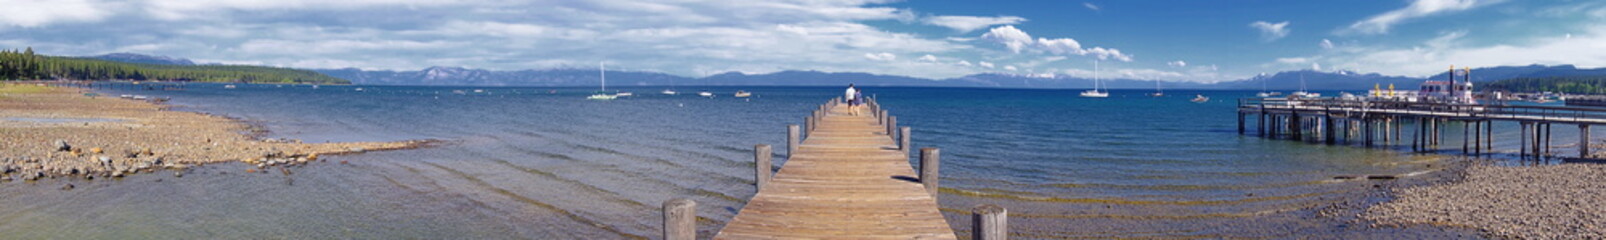  Pier on the north shore in Tahoe near Tahoe City.